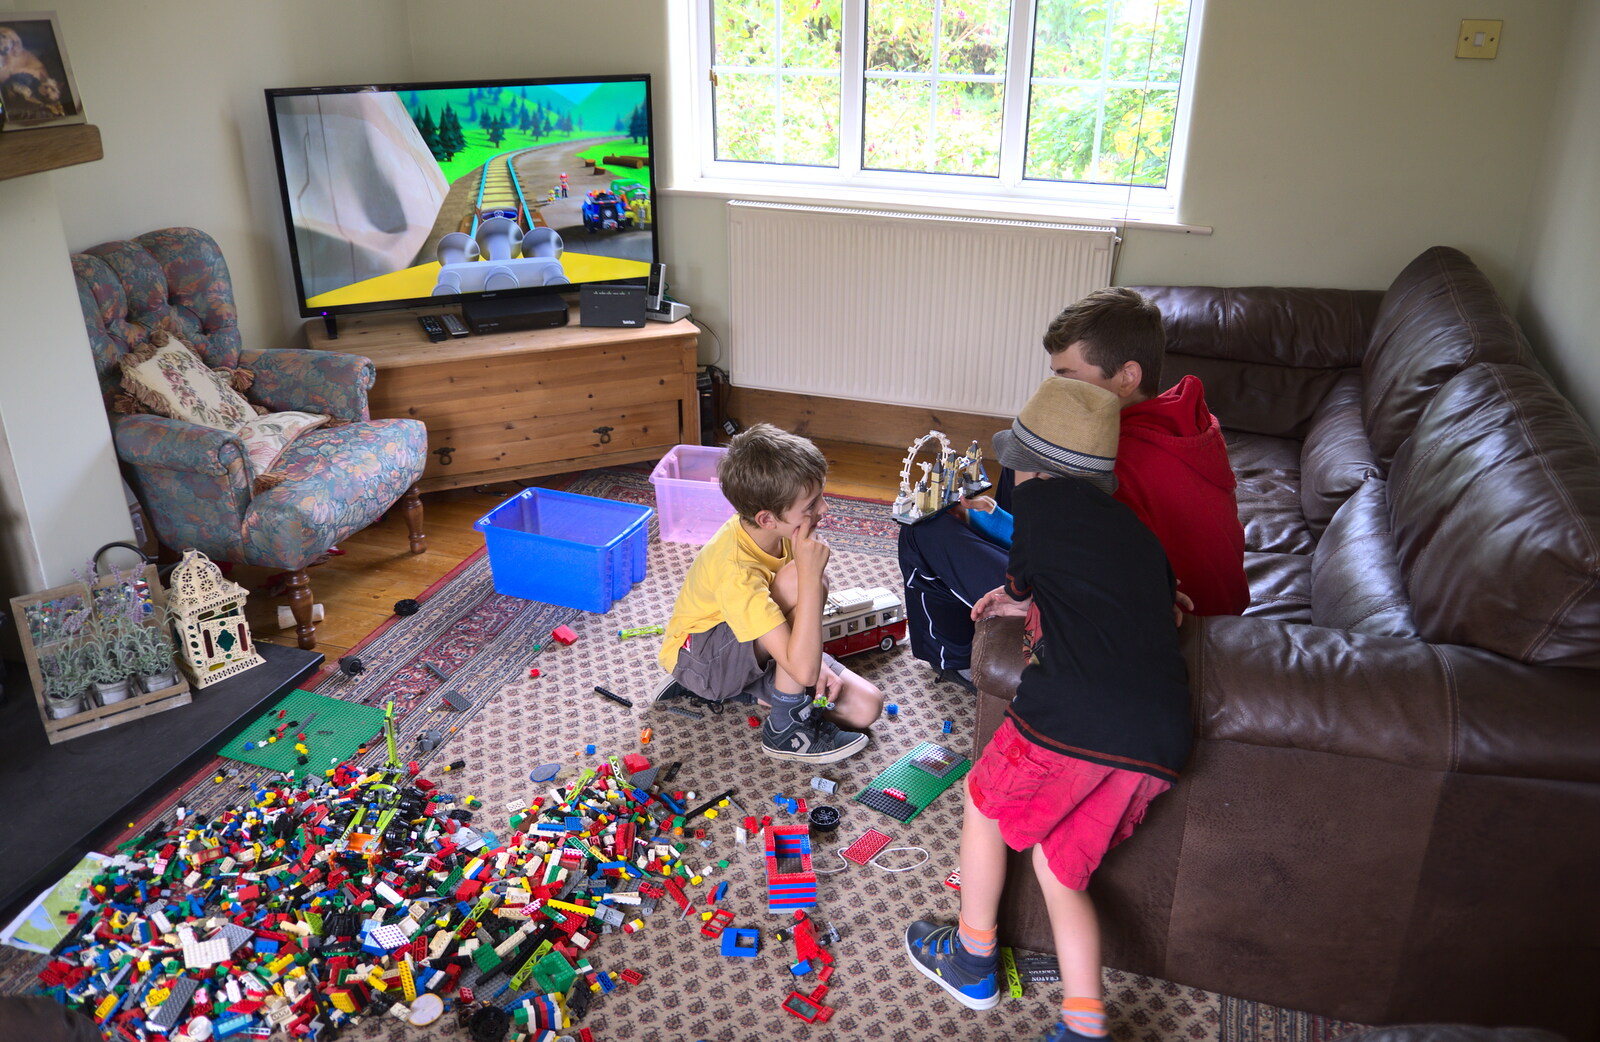 The boys destroy the lounge with Lego from A Barbeque at Sean's, Walkford, Dorset - 28th July 2018